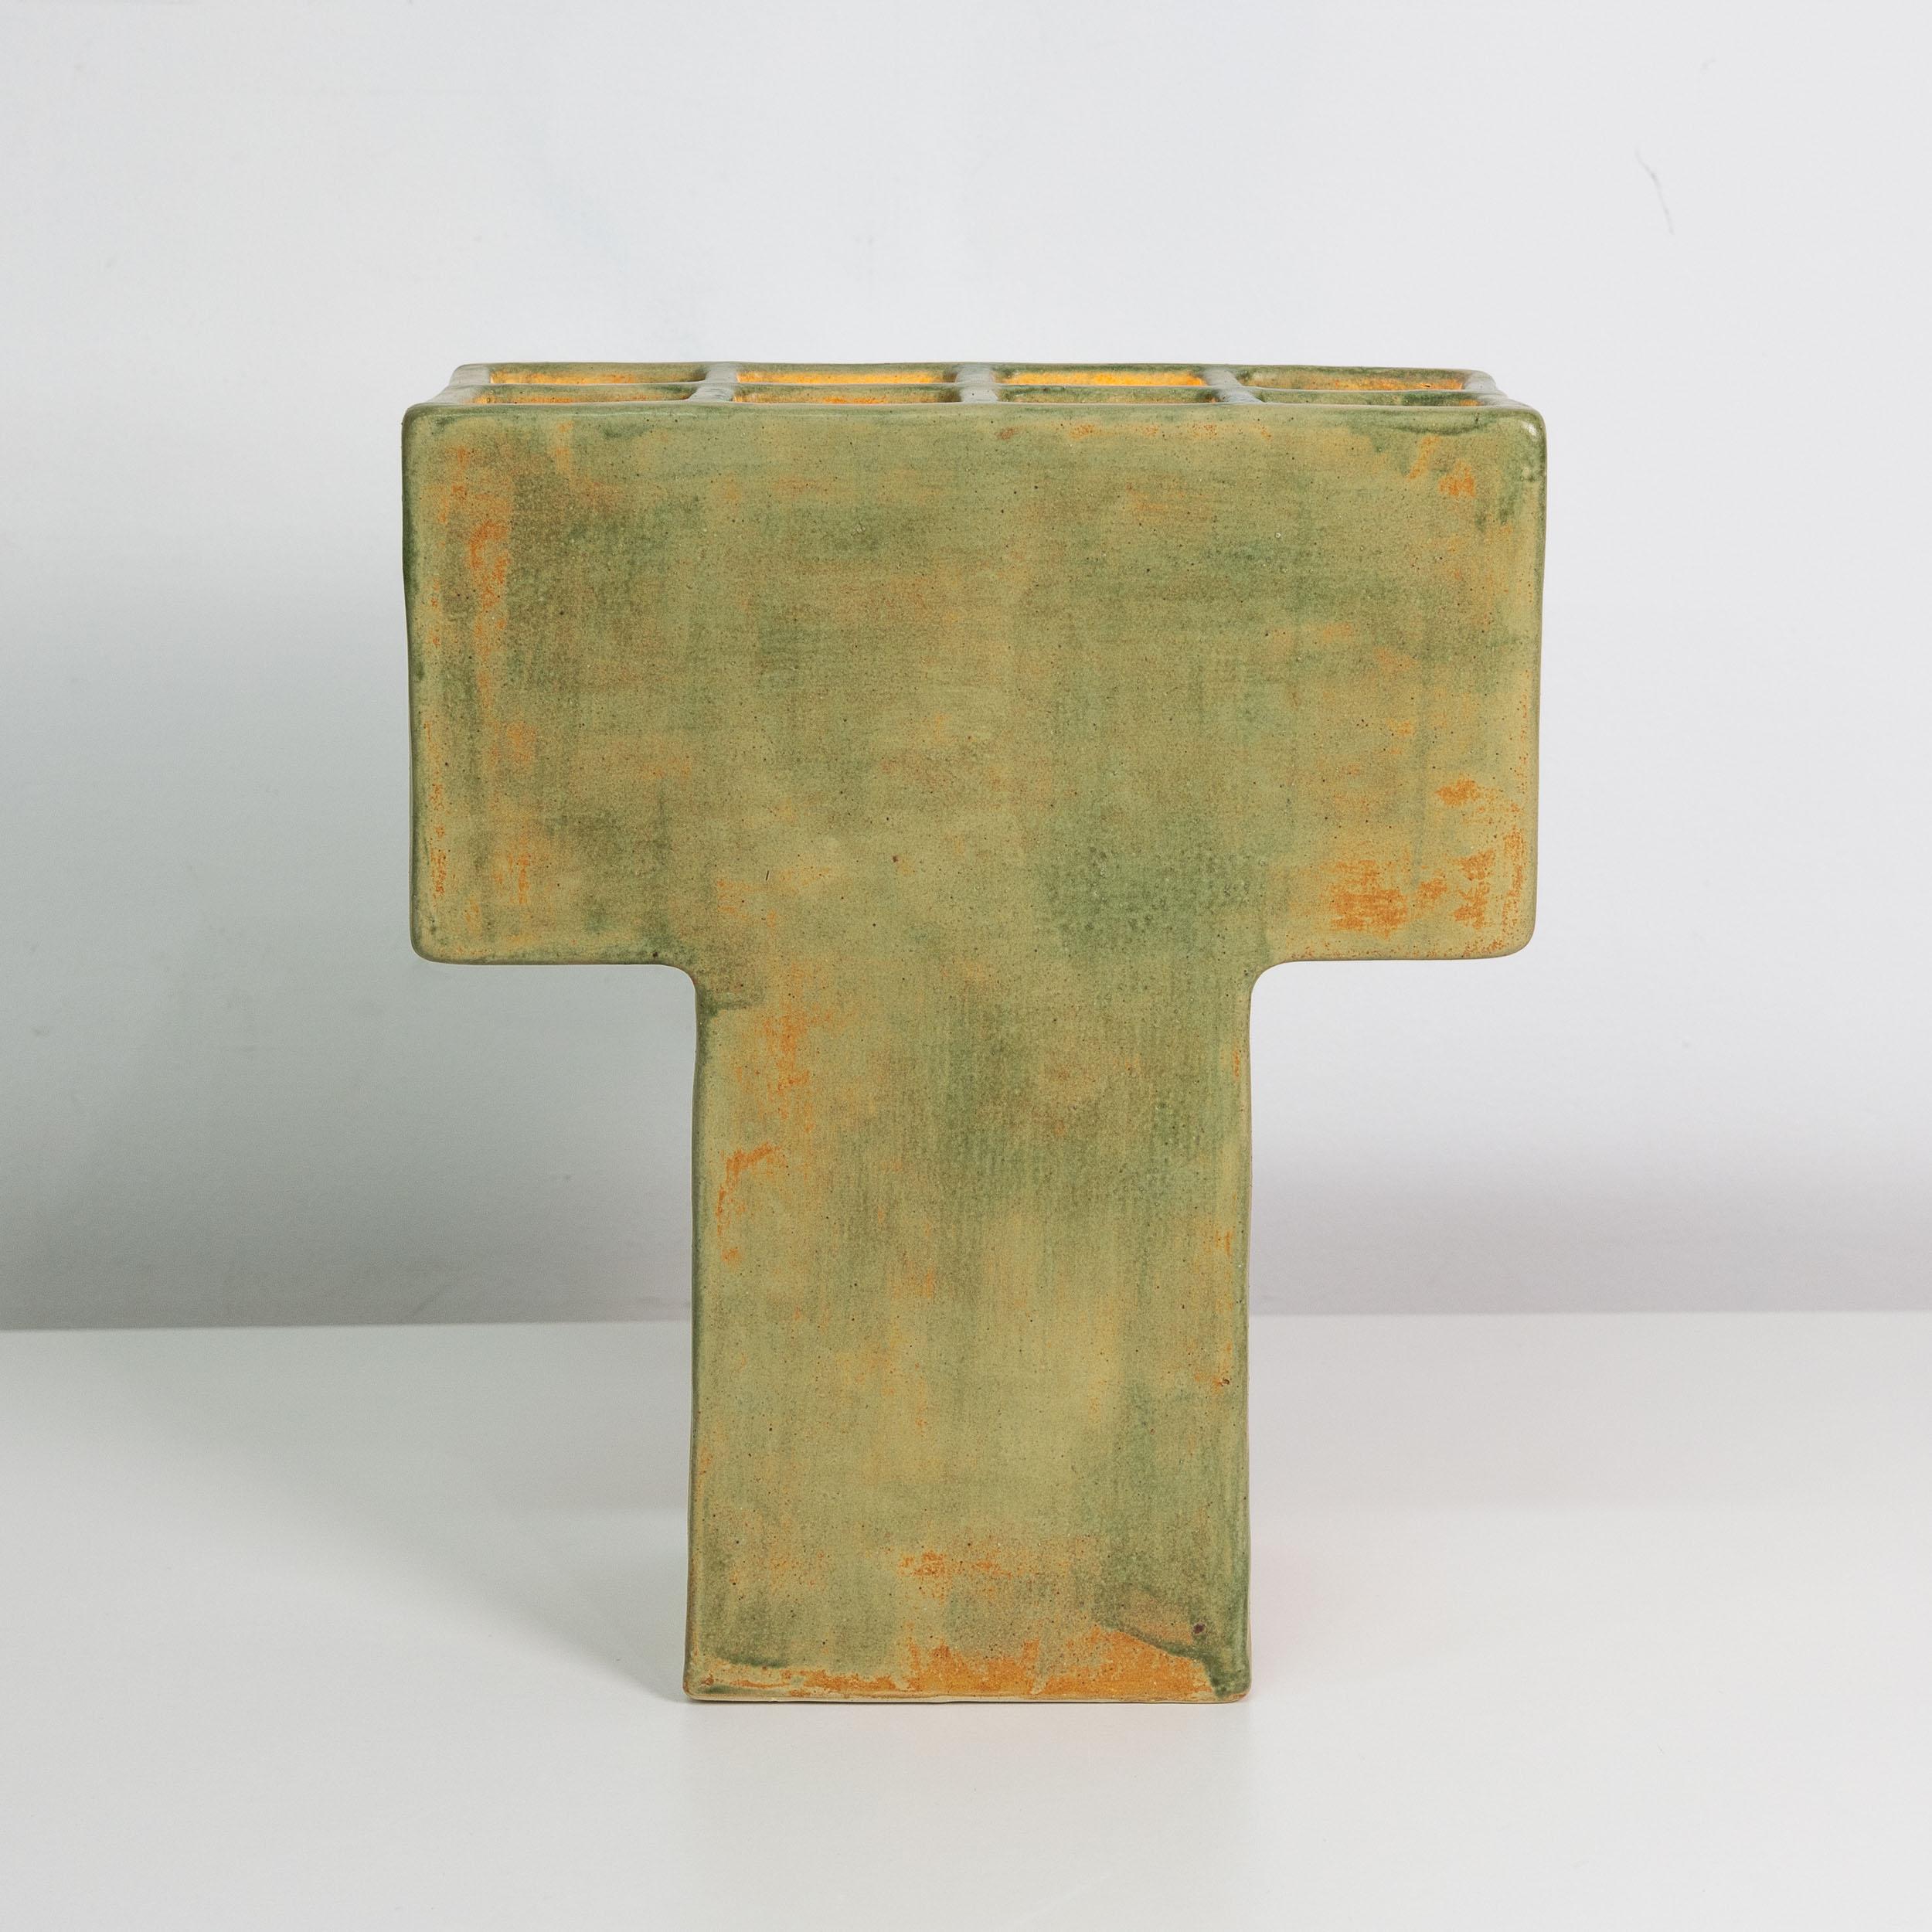 American Mr. T Ceramic Table Lamp, Geometric, Brutalist, Square Table Light, Clay, Glazed For Sale